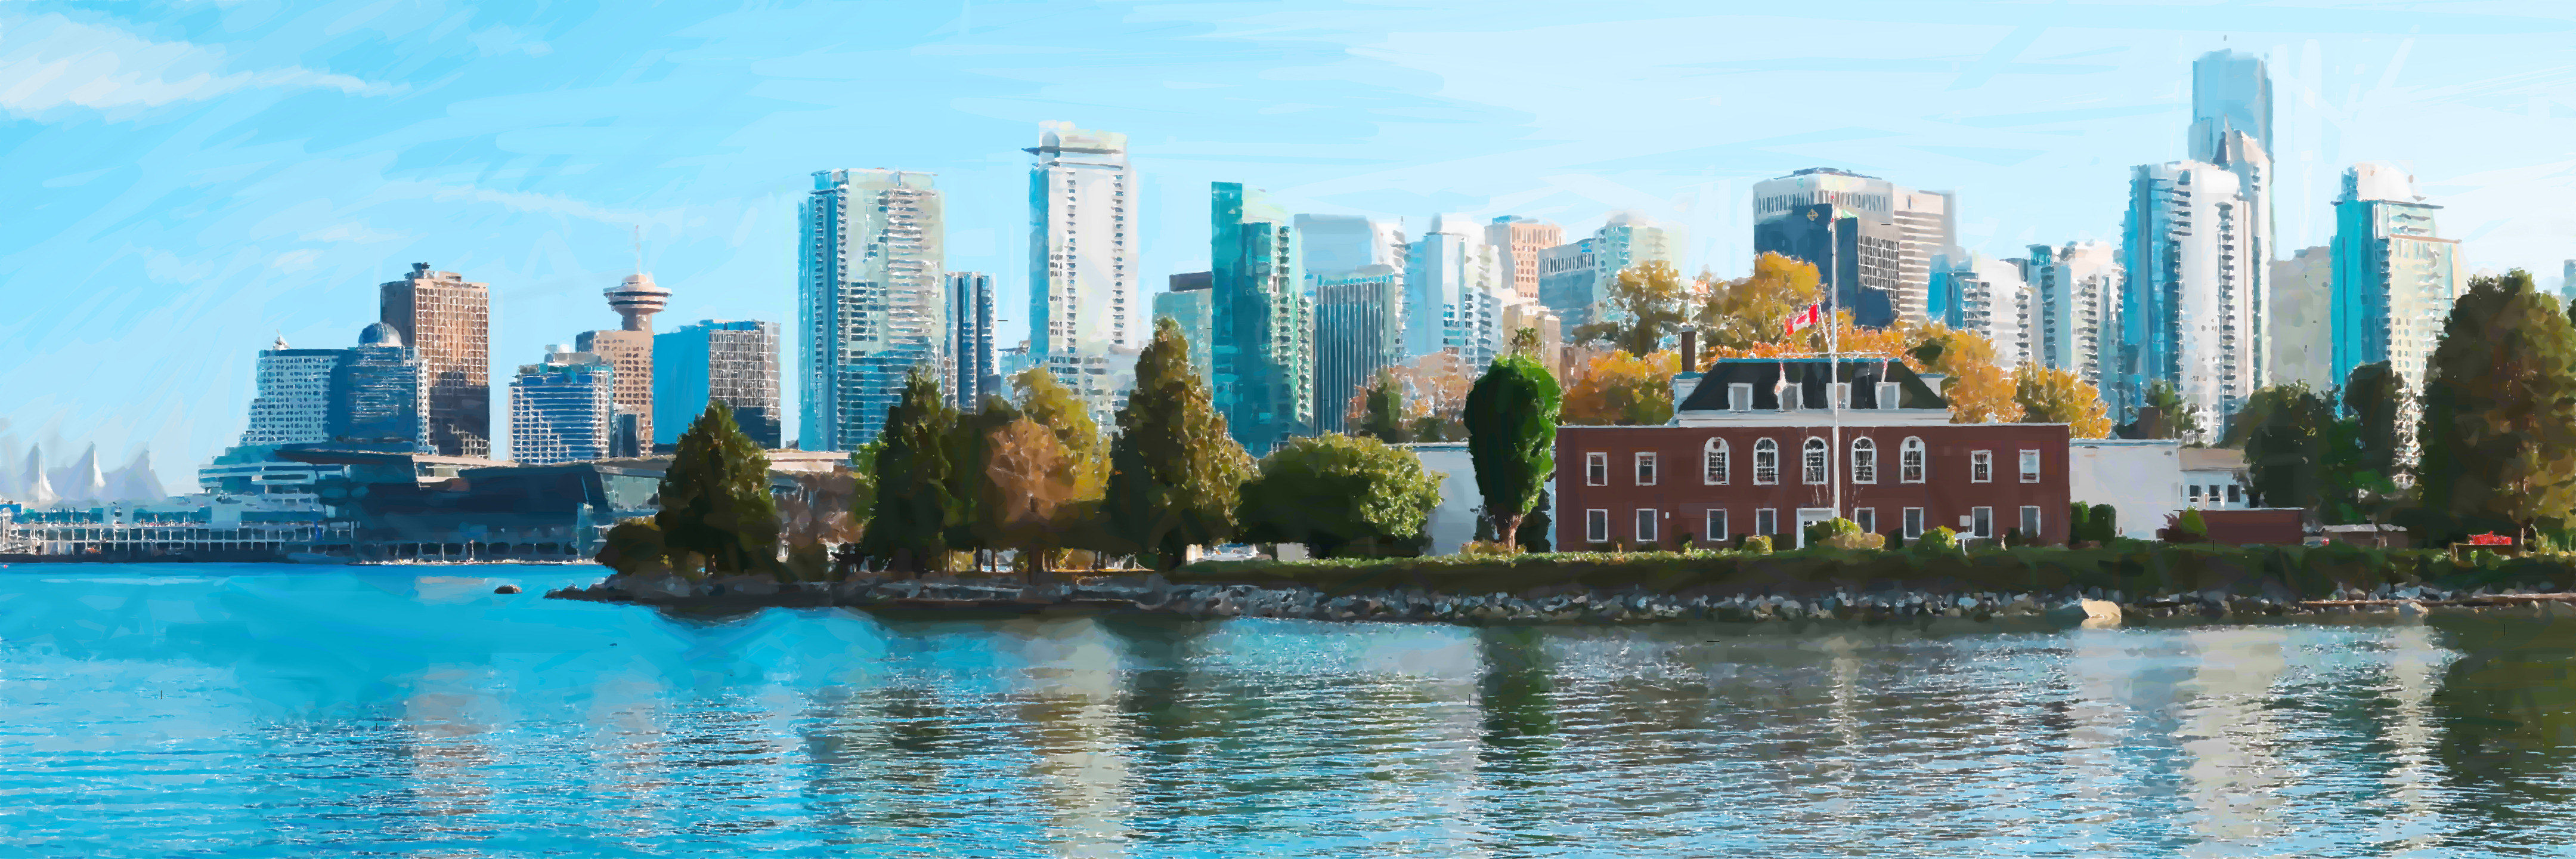 Vancouver panorama by maXX2707